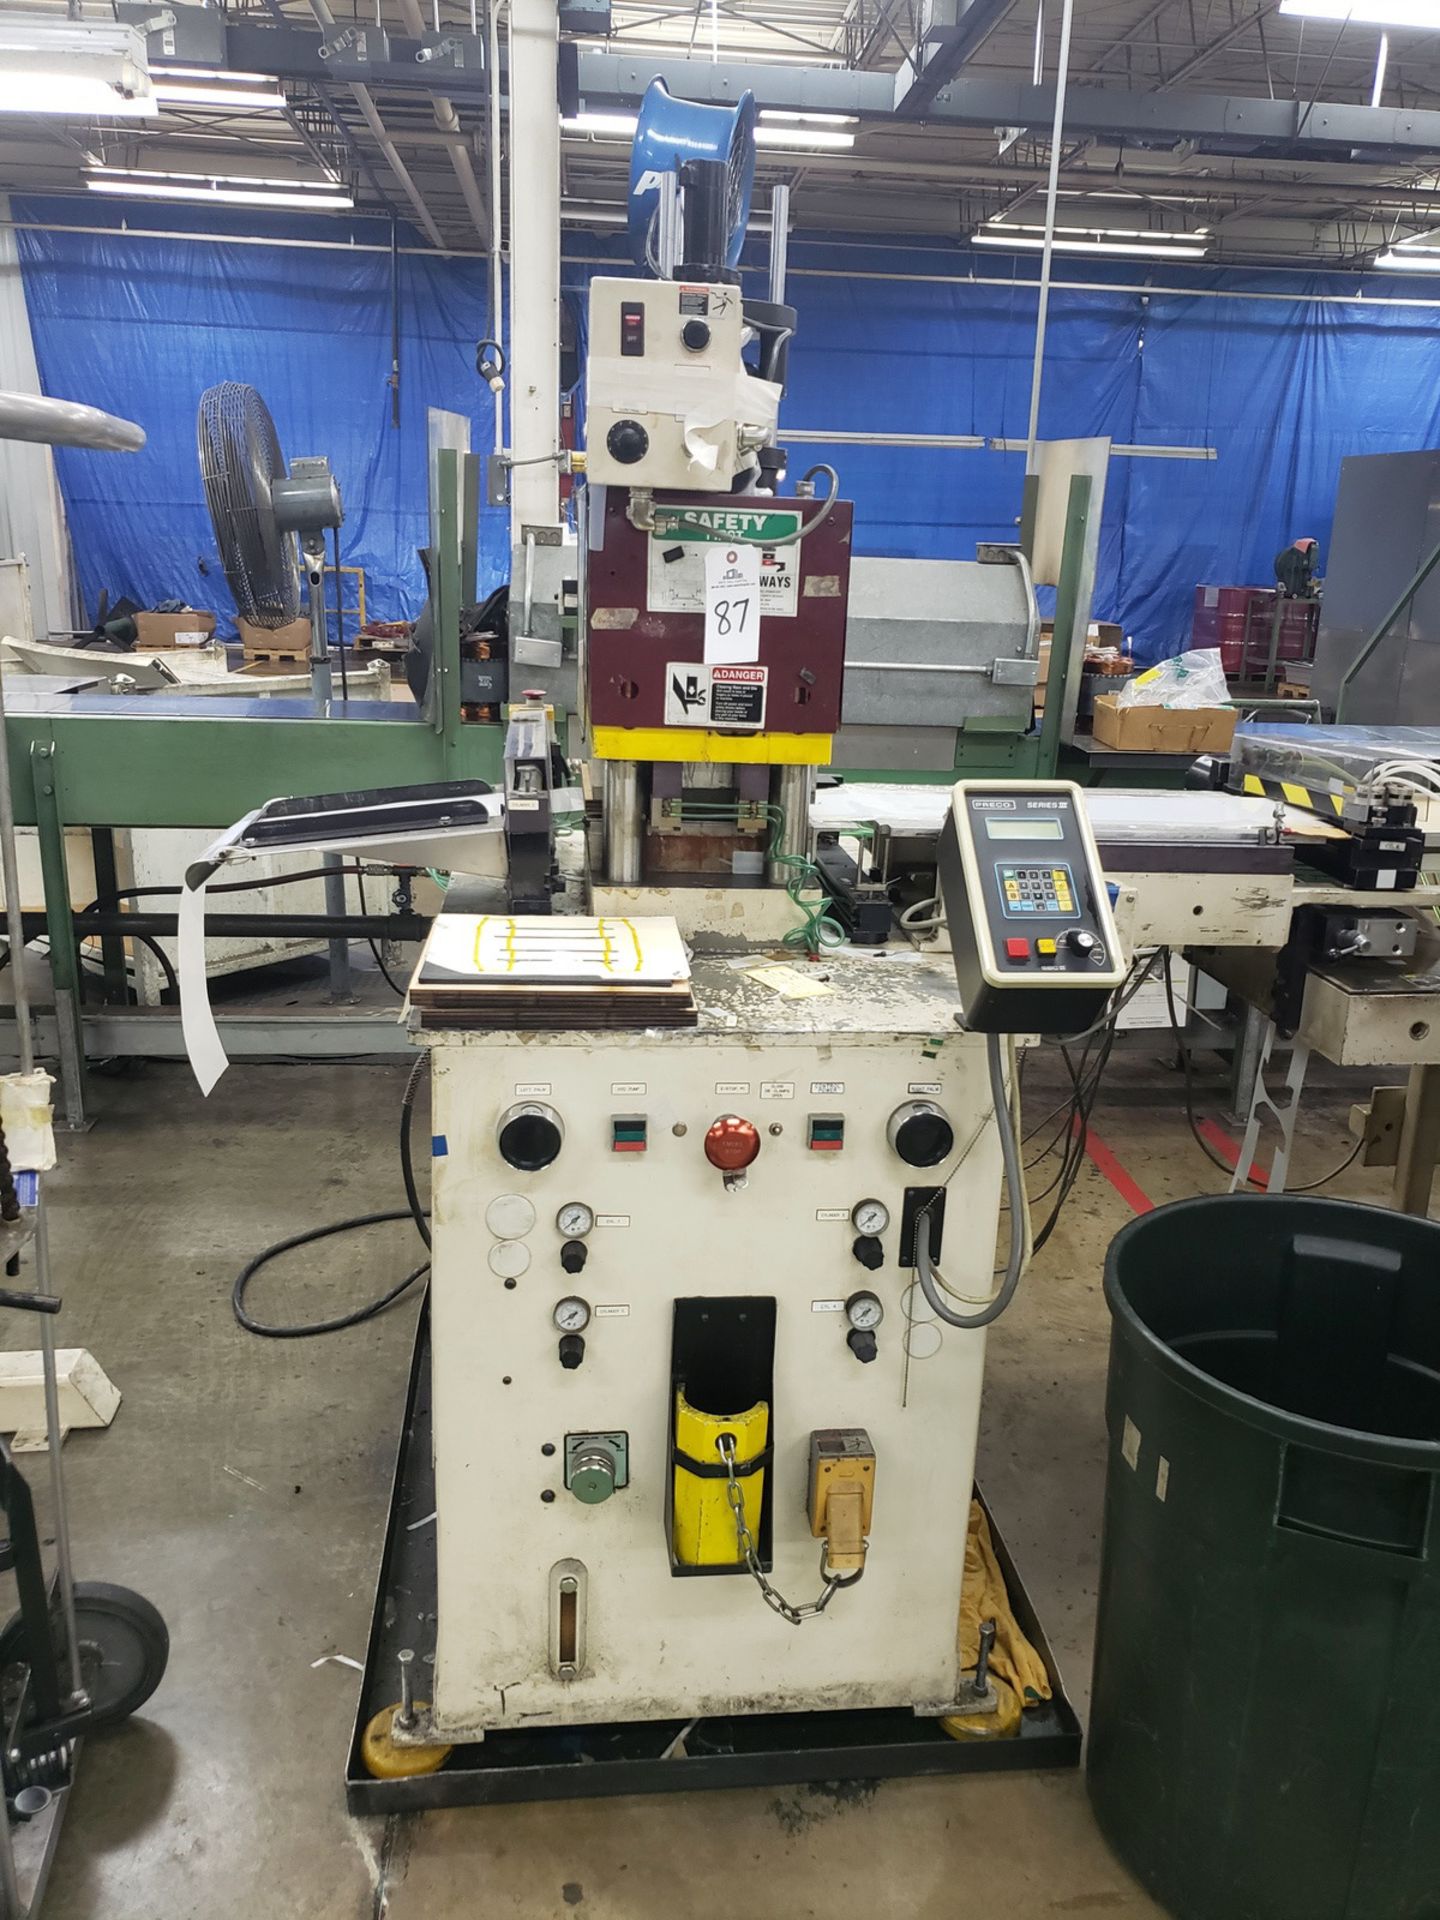 Preco 20 Ton Stamping Press, M# 1212-L-20T, W/ Material Reel, Cut-Off Die & Discharge | Rig Fee $300